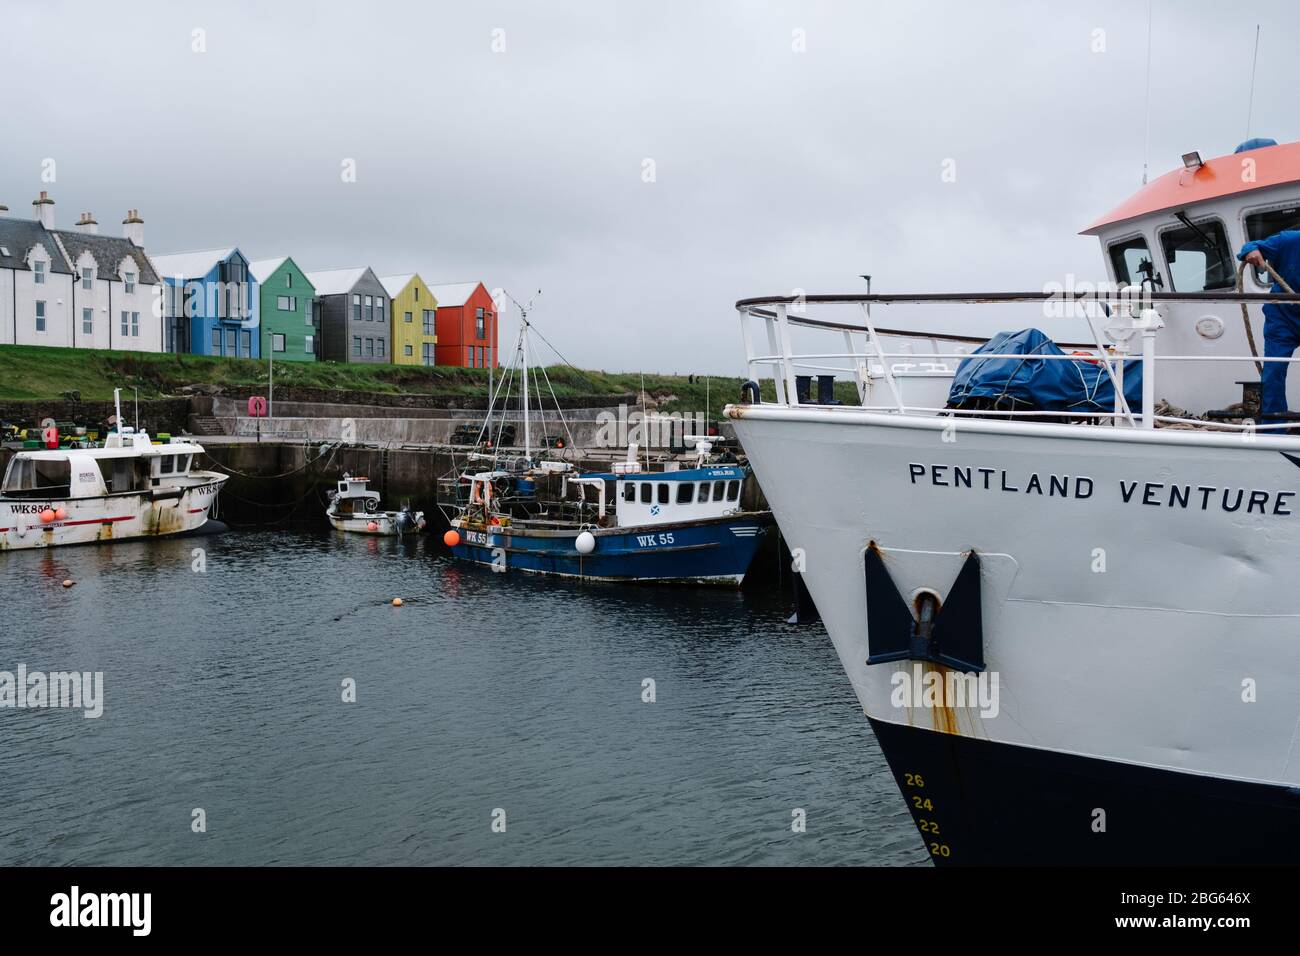 The Pentland Venture passenger ferry moored in the small harbour in John O' Groats after a busy day ferrying people to Orkney and back. Stock Photo